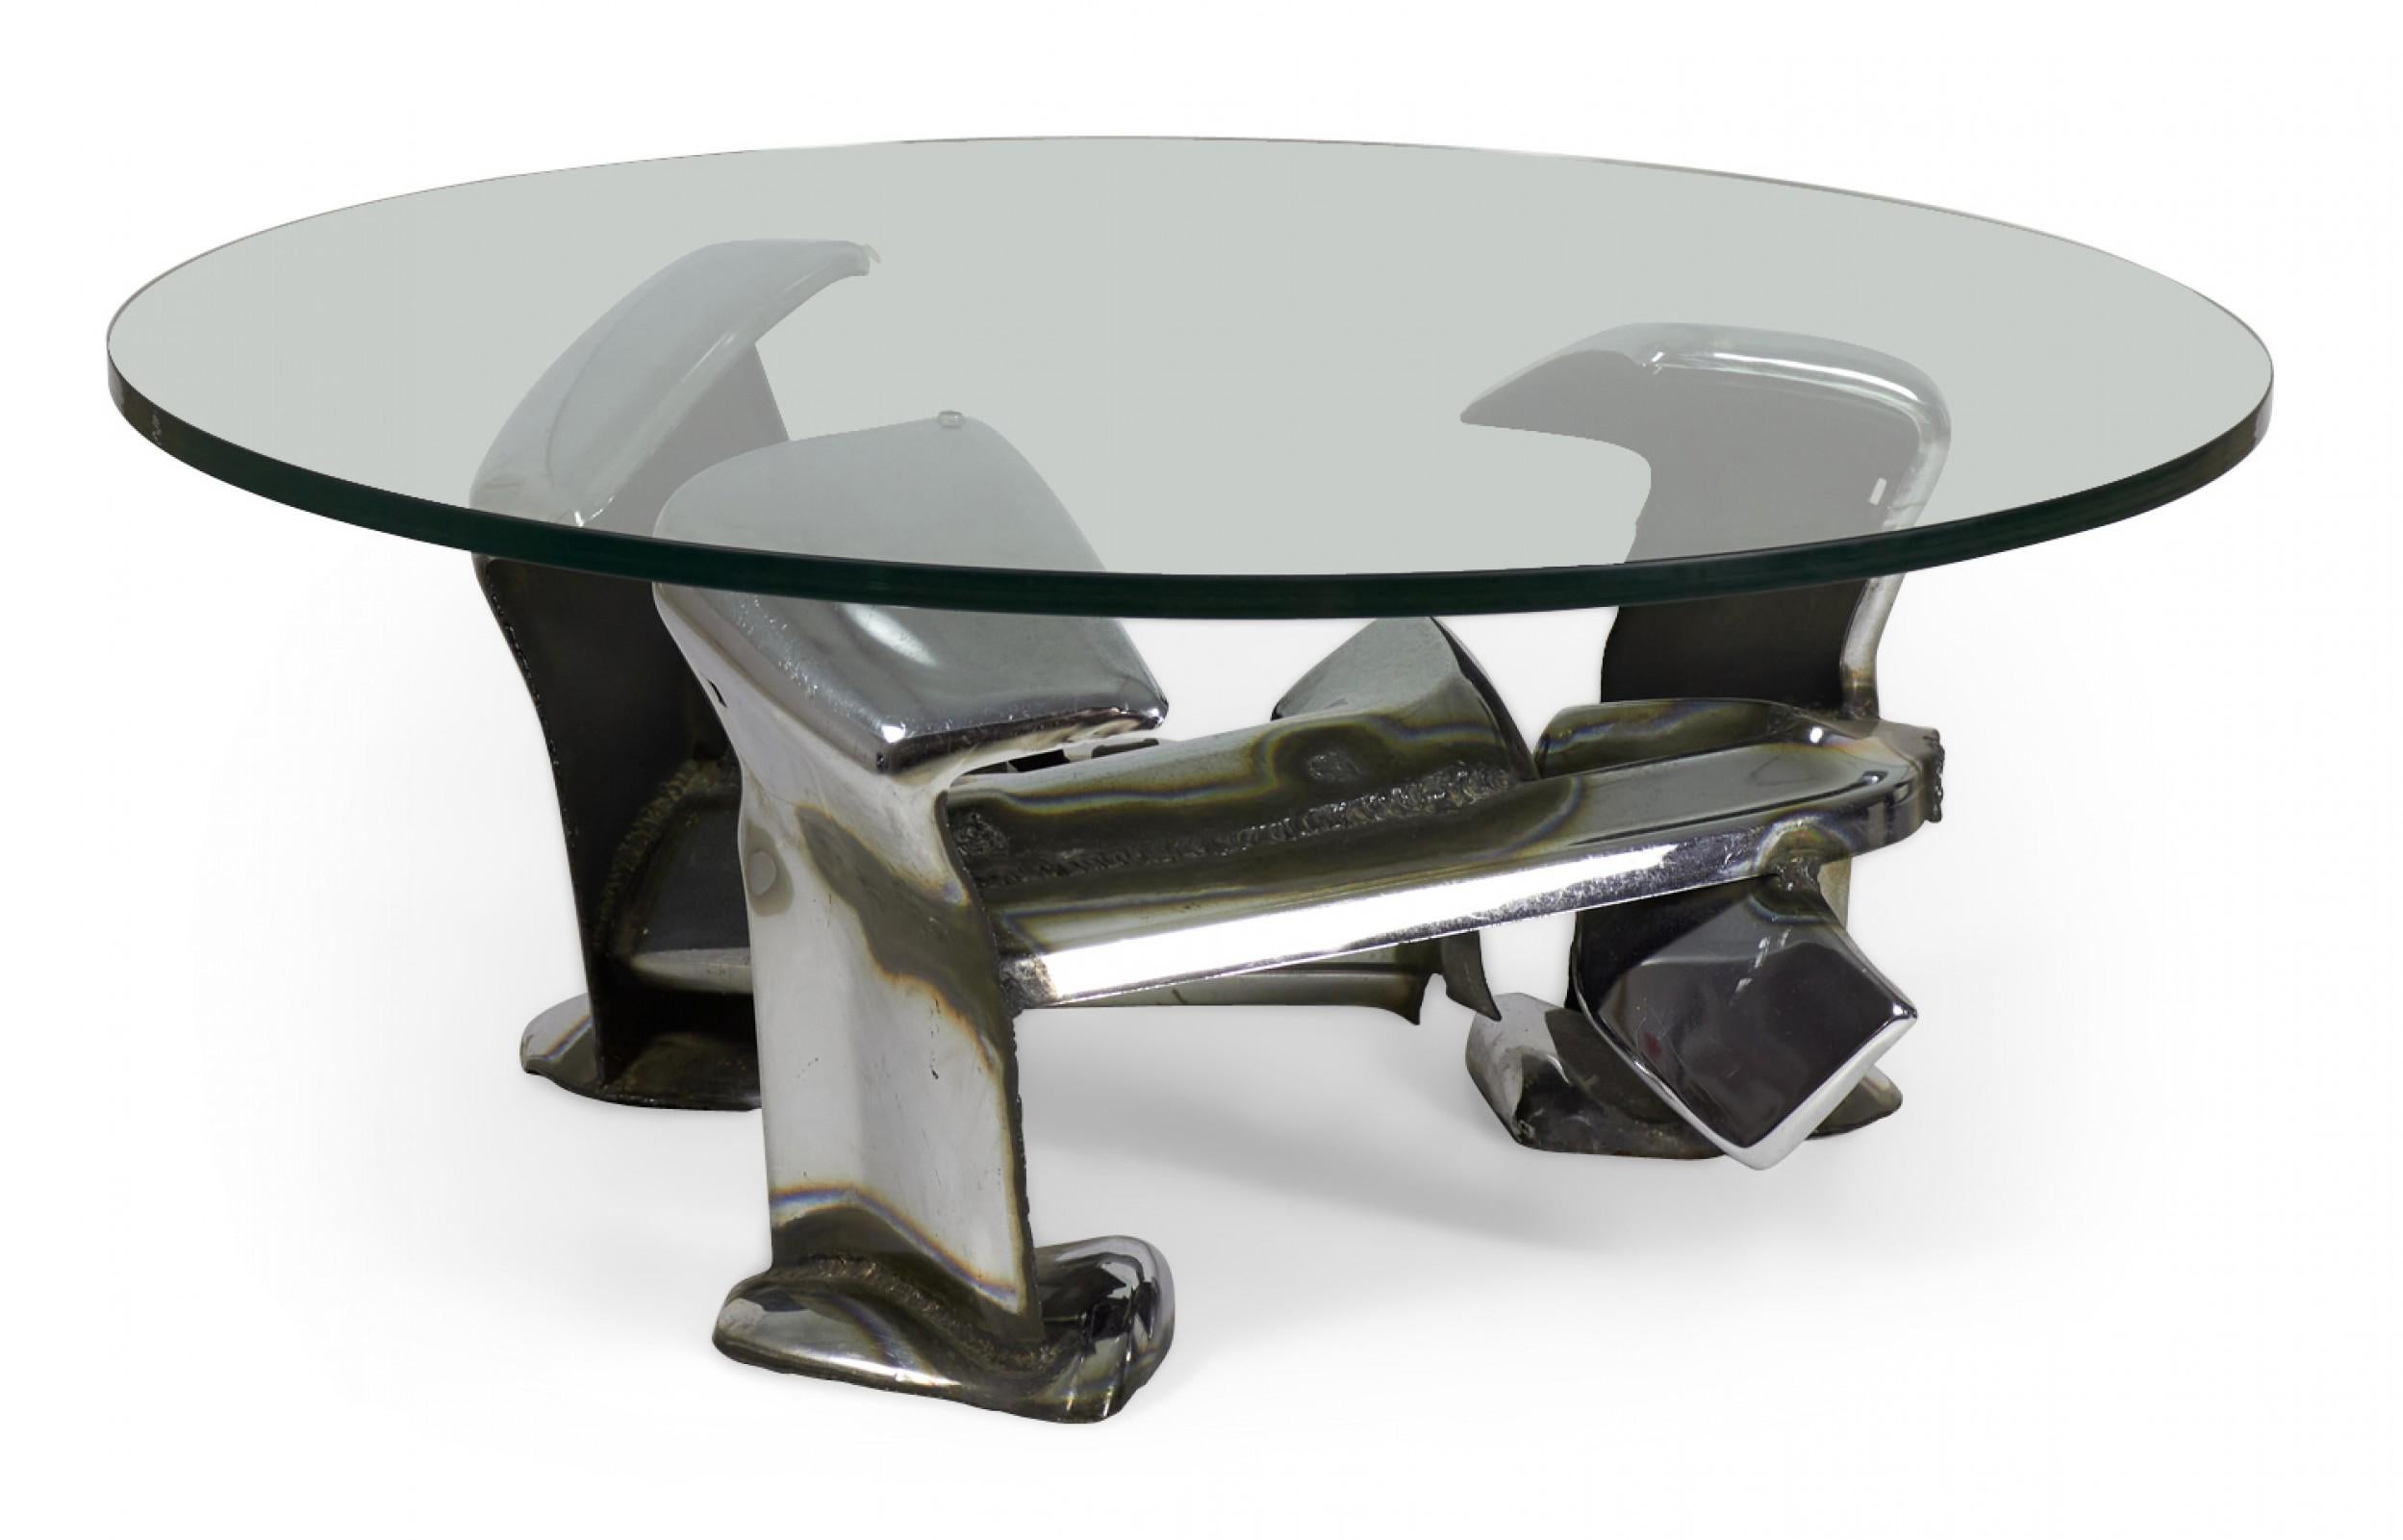 American mid-century Brutalist (1976) sculpted chromium steel coffee table made of welded and shaped car bumpers intertwined to form a base, with a circular clear glass top. (signed, JOHN E. PENDLETON '76)